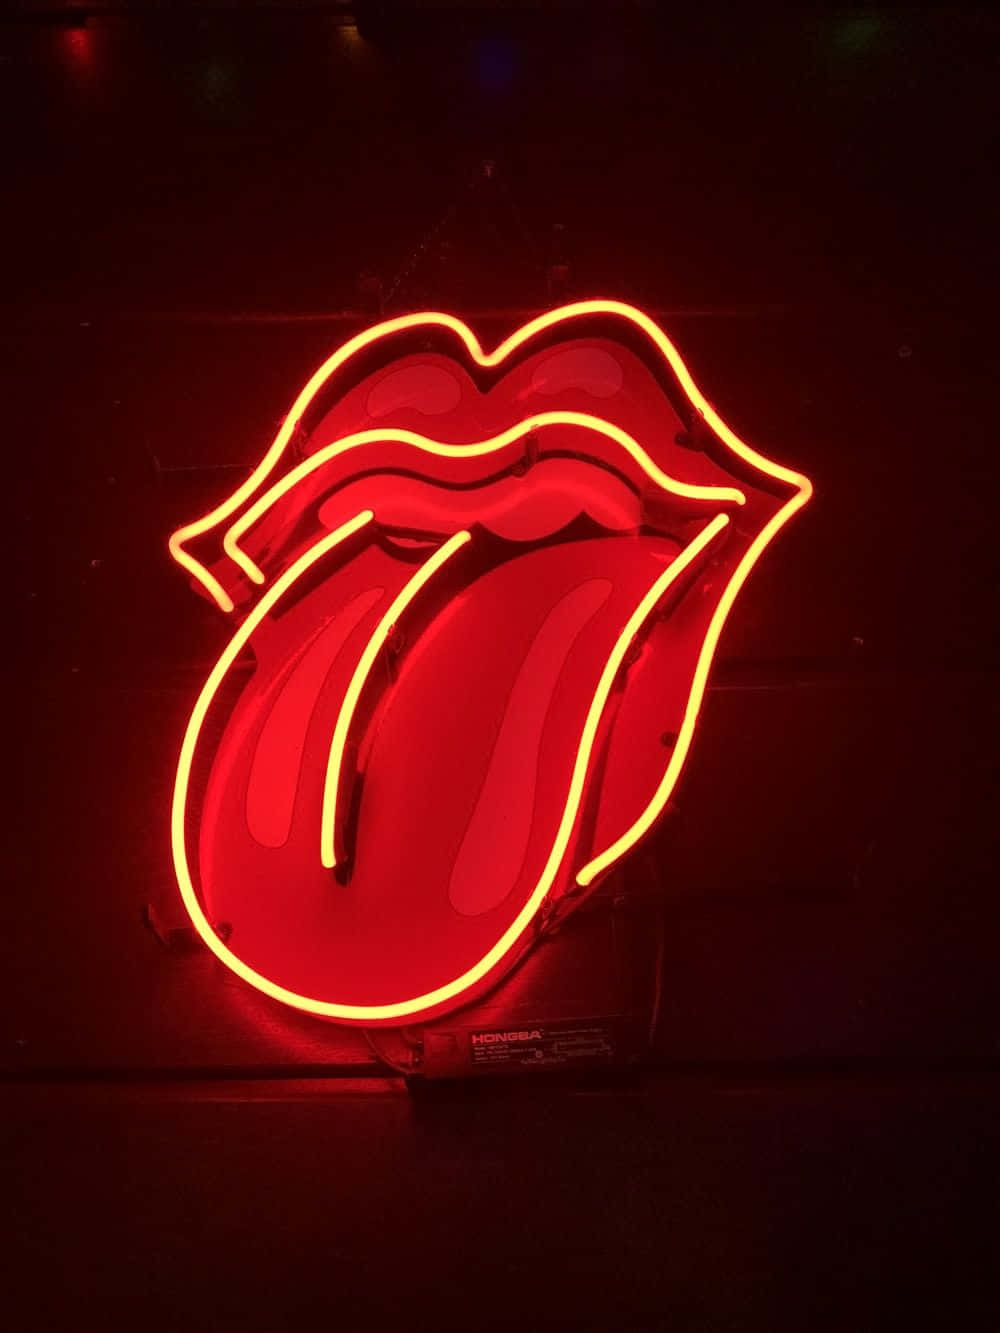 The Rolling Stone Red Led Signage Wallpaper